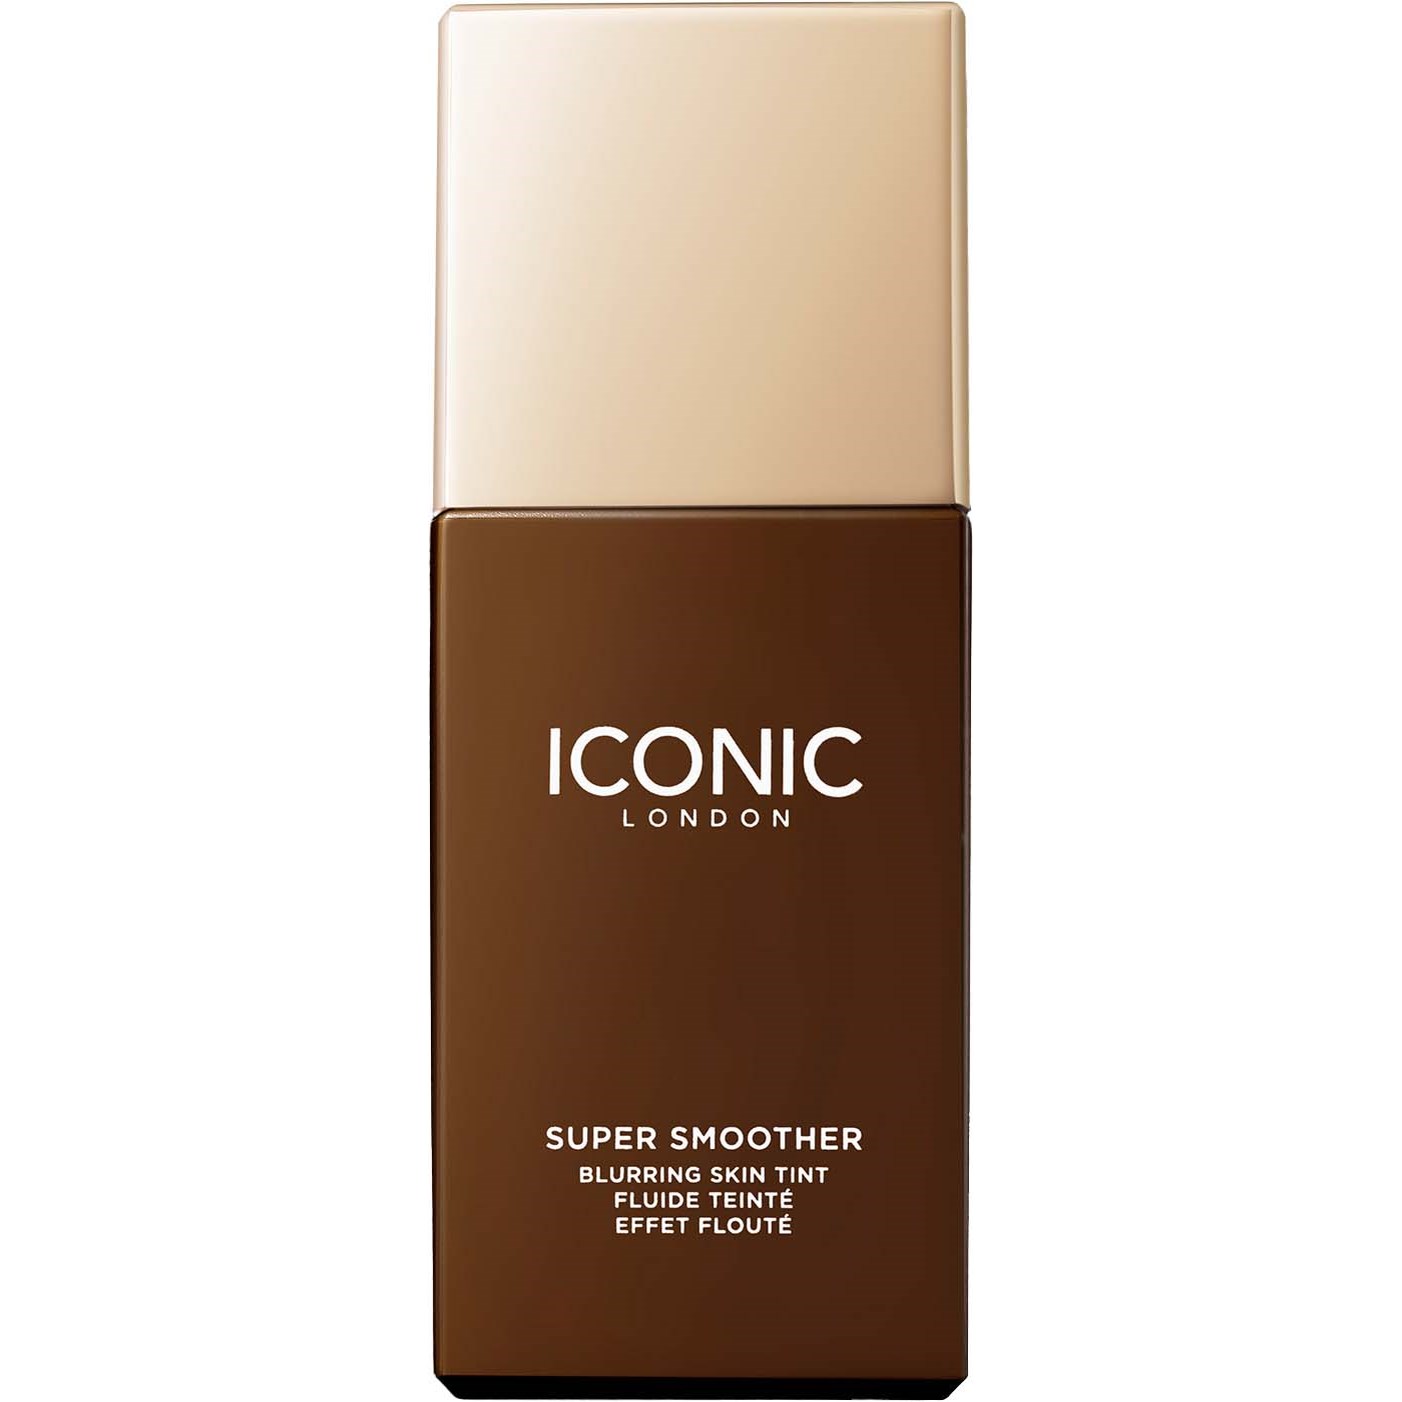 ICONIC London Super Smoother Blurring Skin Tint Golden Rich